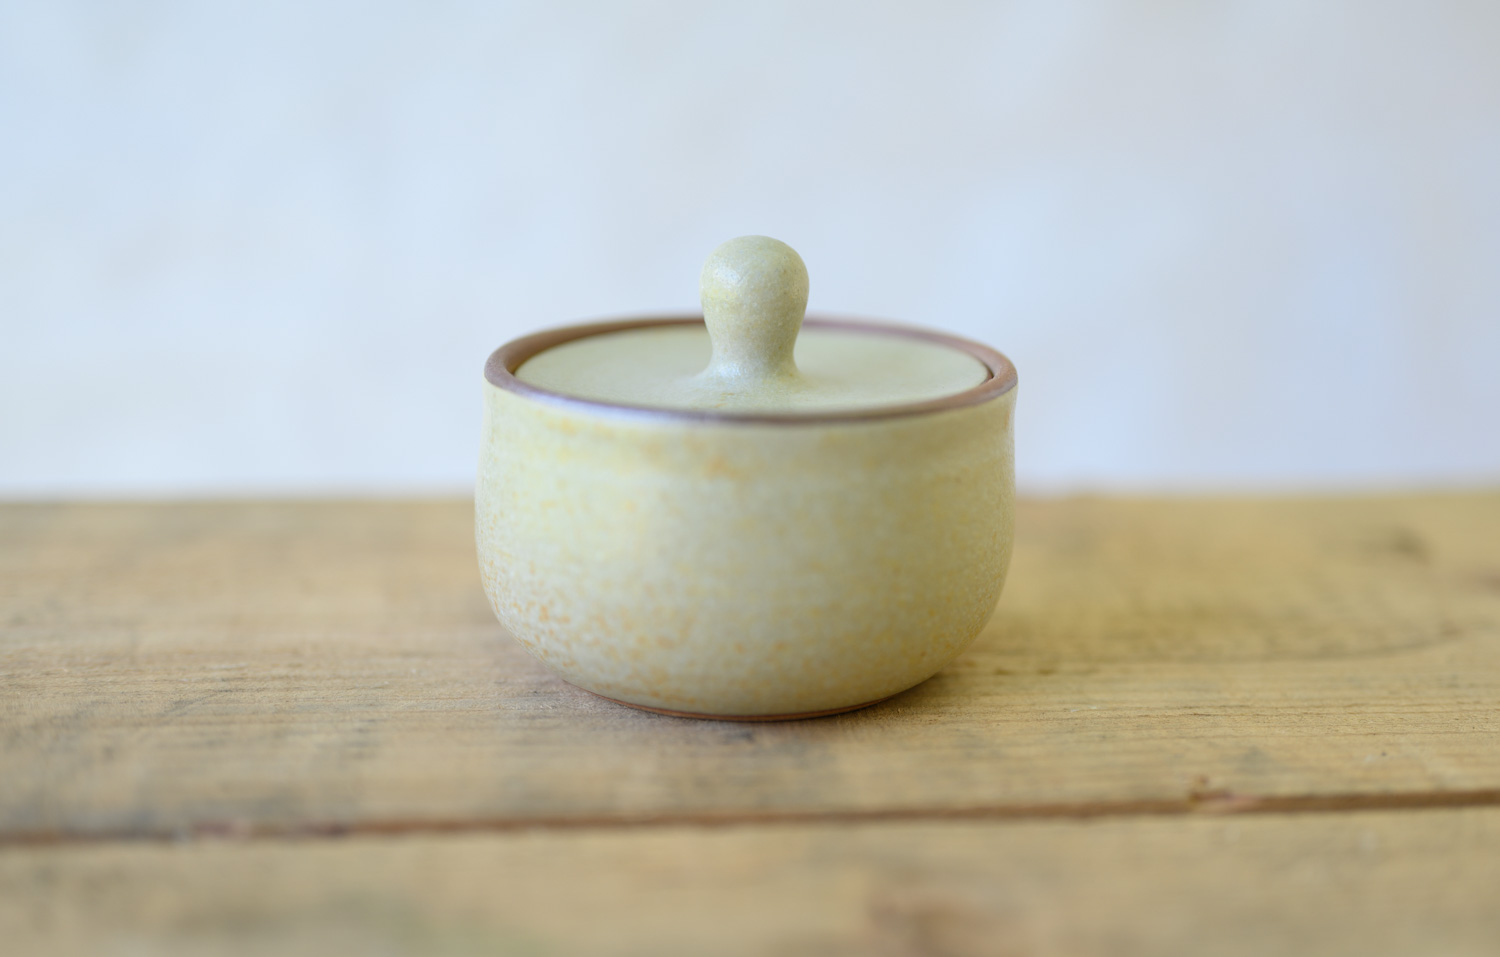 Pottery Lidded Container, Cream Ceramic Sugar Bowl, Salt Container With a  Spoon, Kitchen Storage, Lidded Sugar Jar, Ceramic Container 